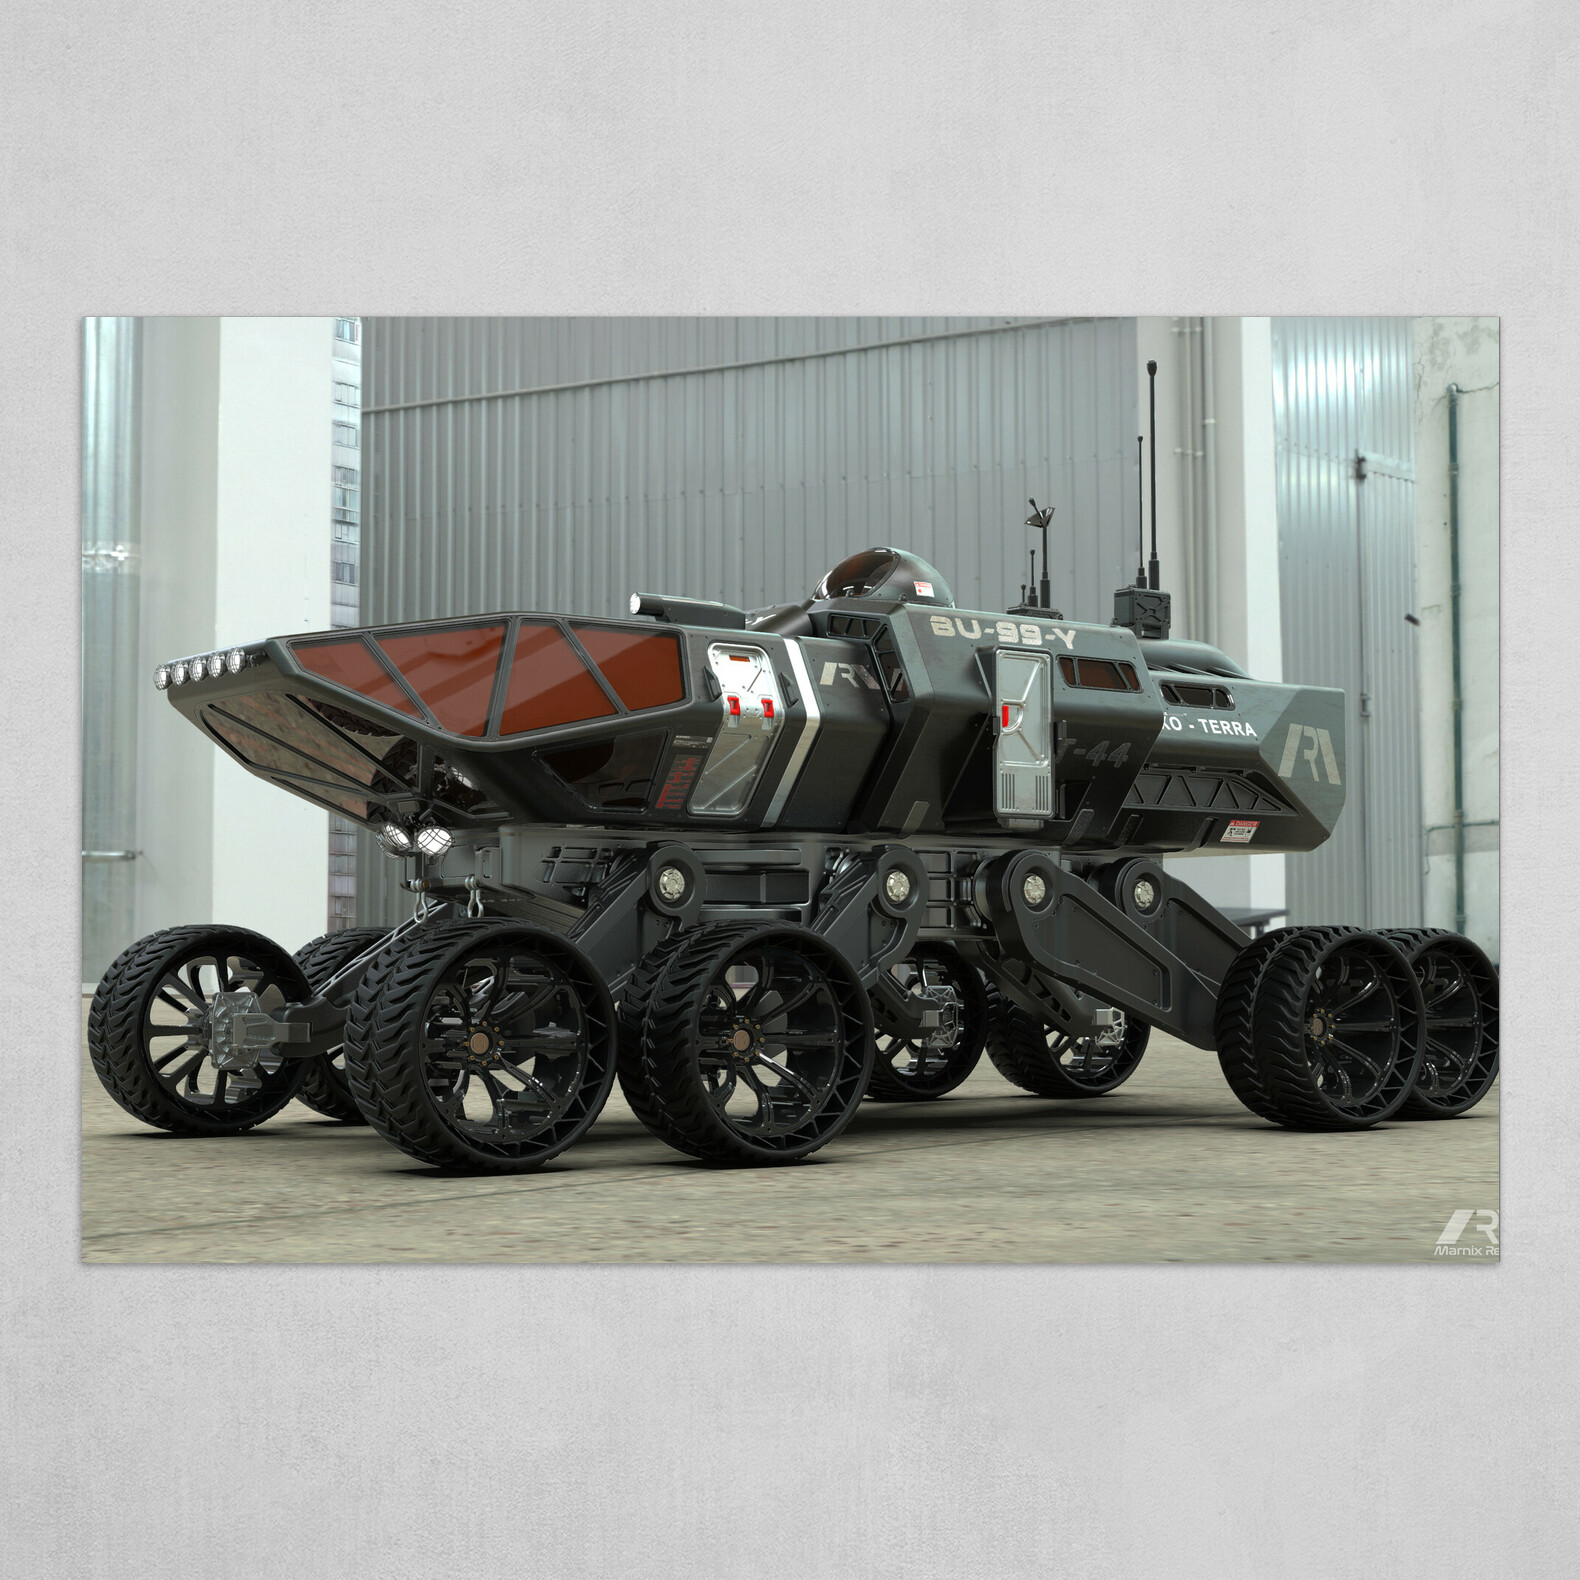 Space rover